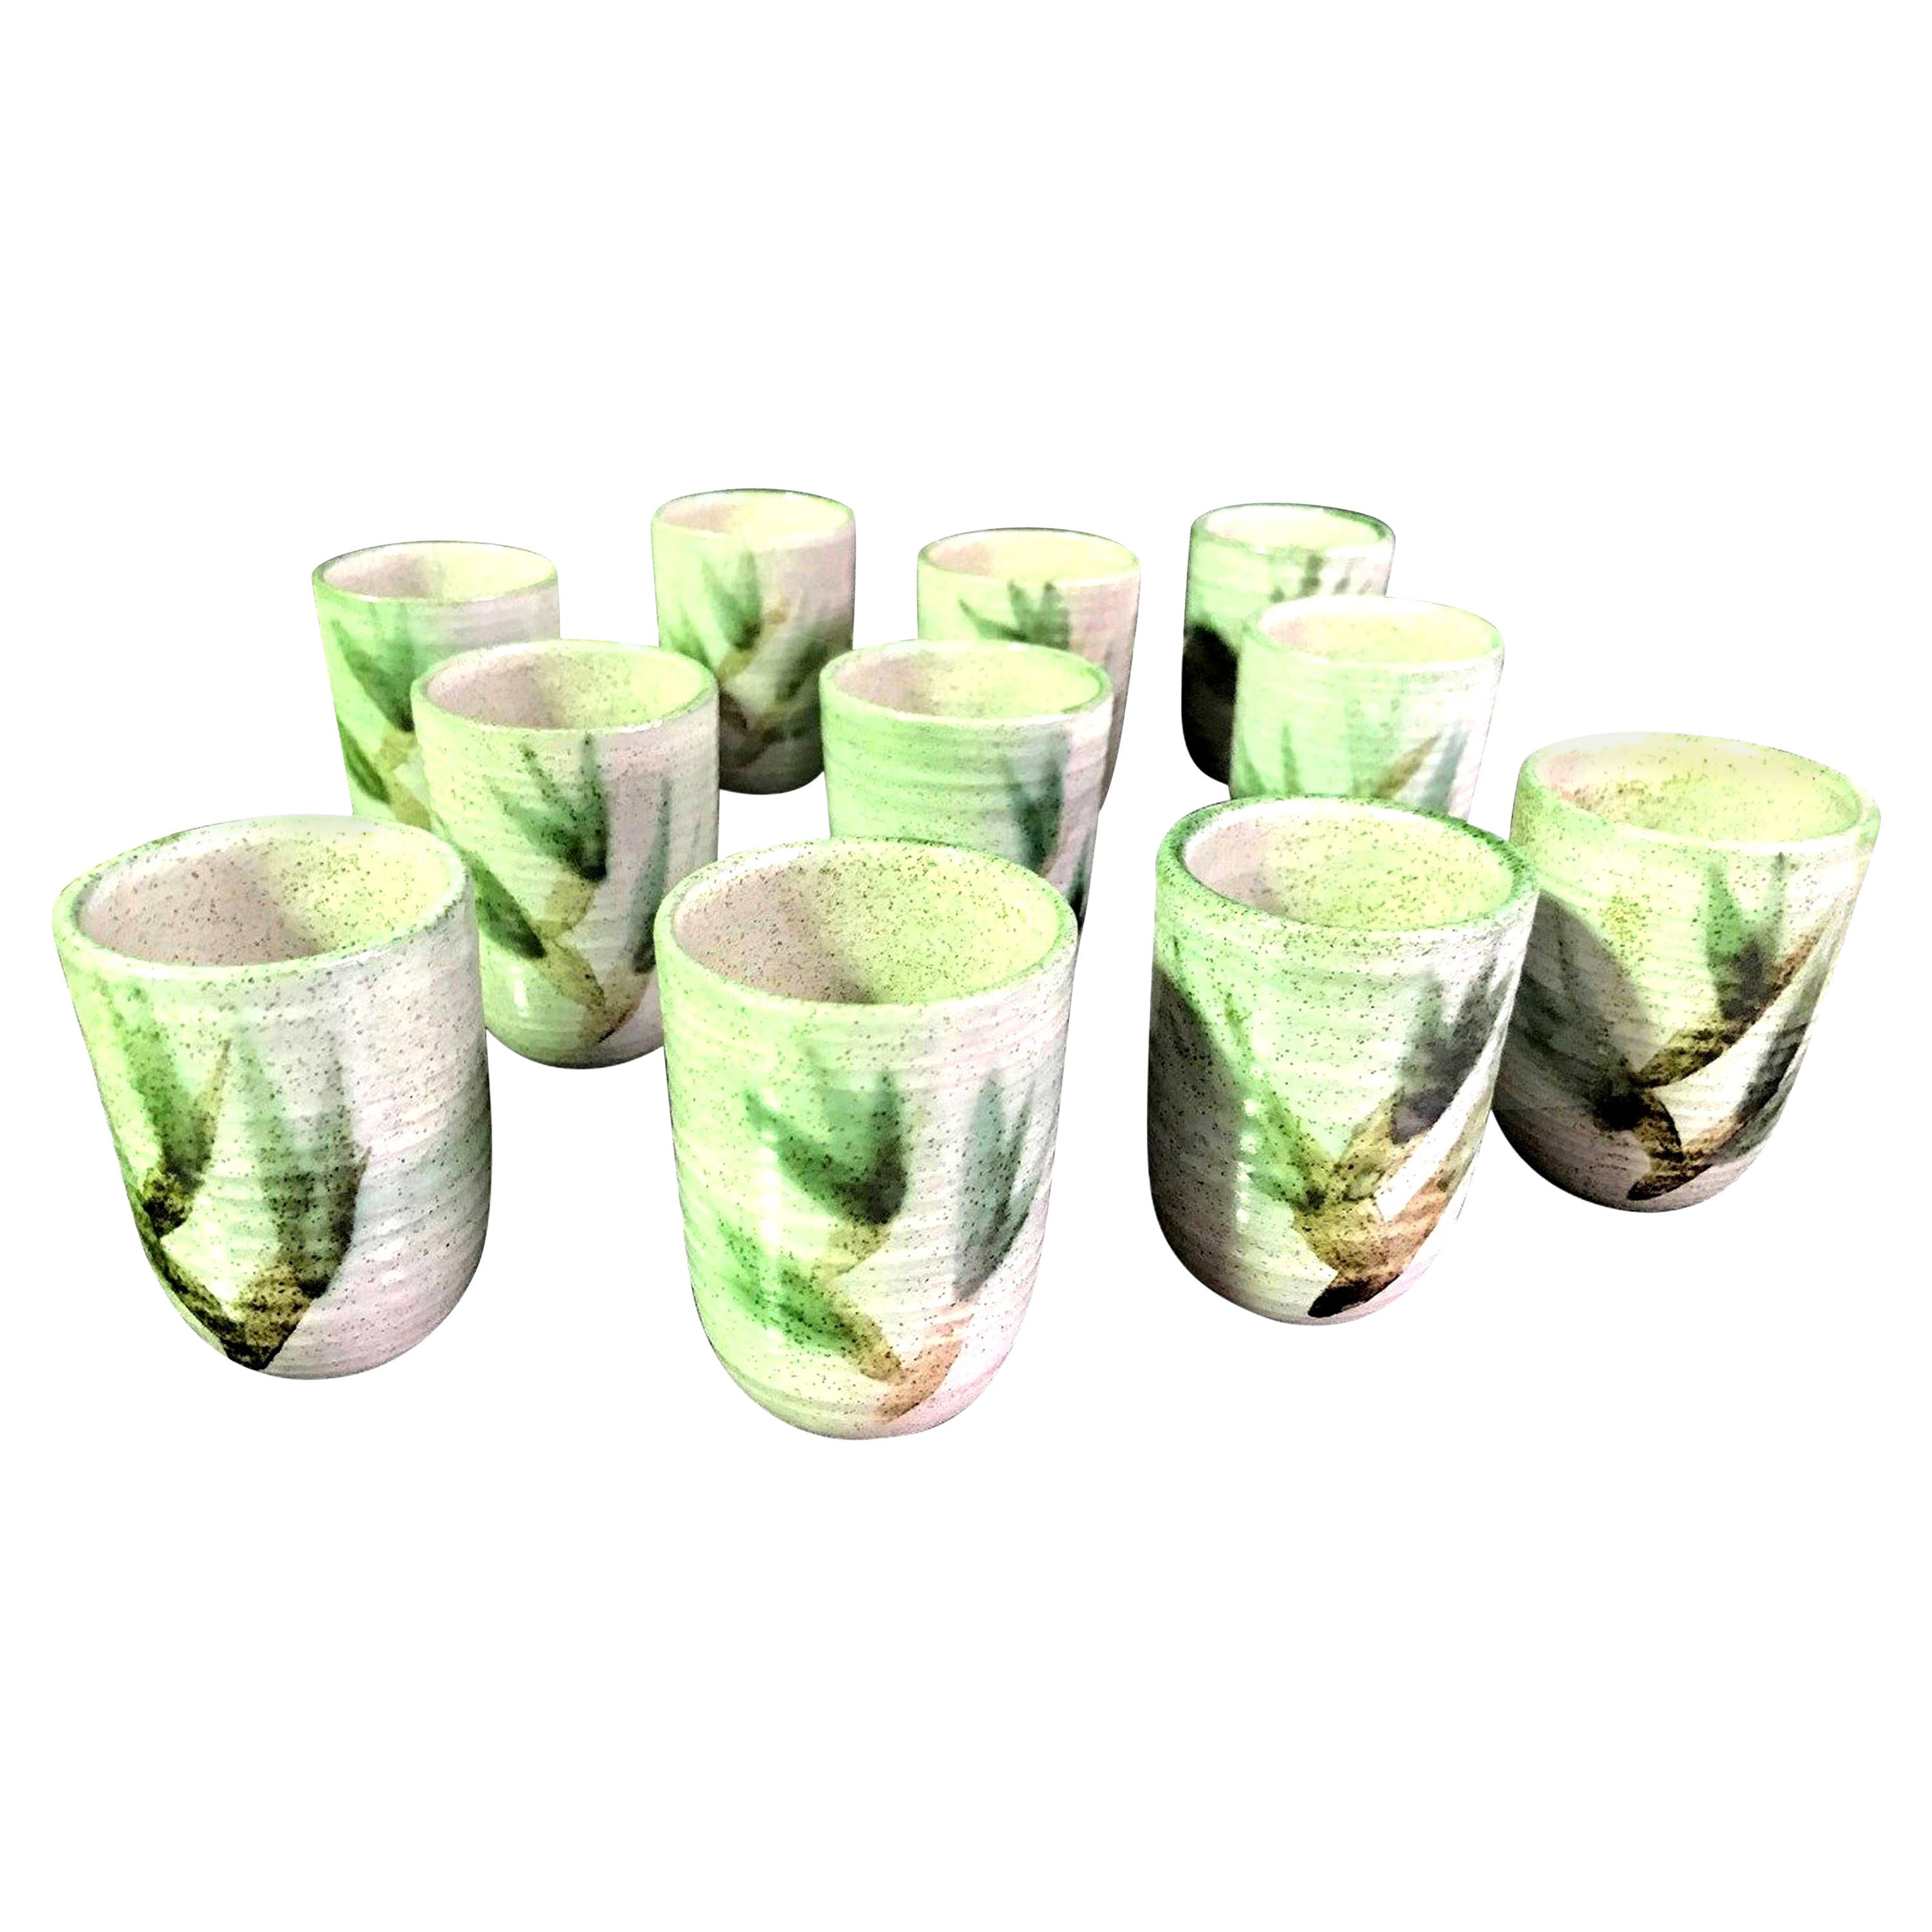 Otto and Vivika Heino Mid-Century Modern Ceramic Pottery 12-Piece Goblet/Cup Set For Sale